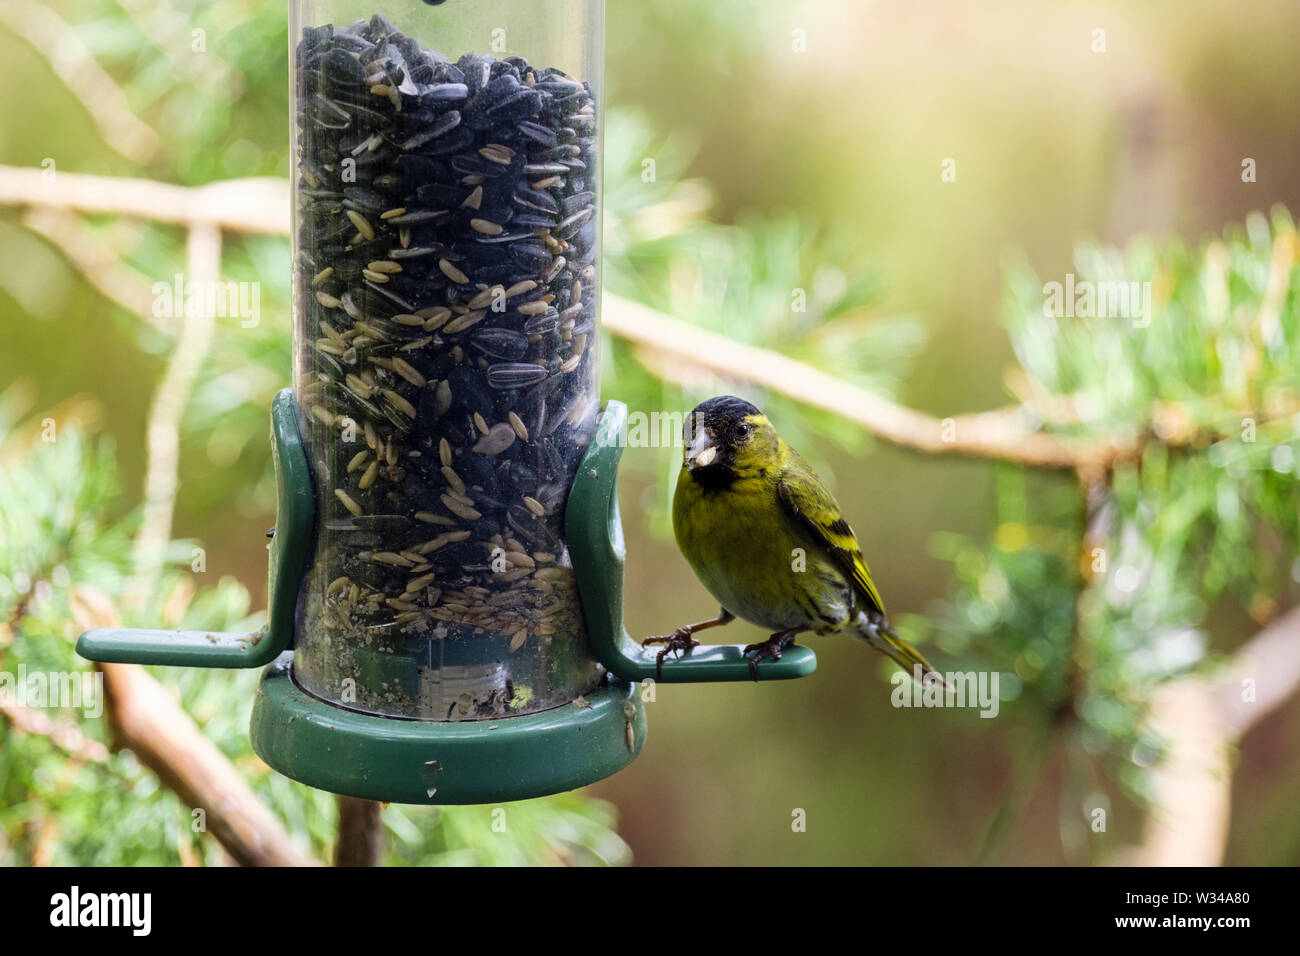 A male Siskin (Carduelis spinus) finch eating a seed from a garden bird feeder of seeds in a pine forest. Scotland, UK, Britain Stock Photo